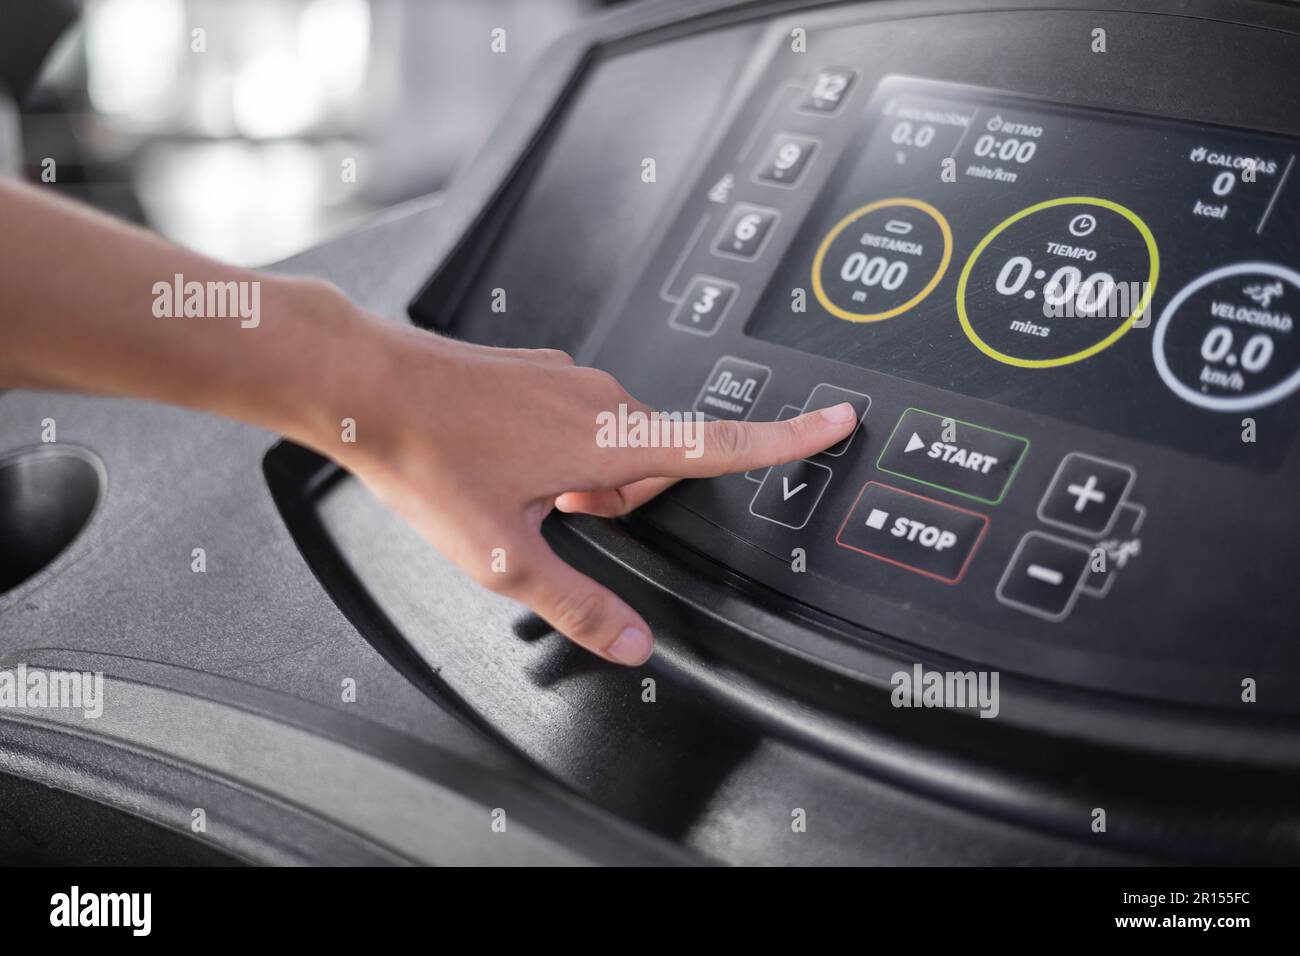 details of hand pressing buttons of the control panel of a treadmill, gym machines for cardio, objects and technology with modern design Stock Photo